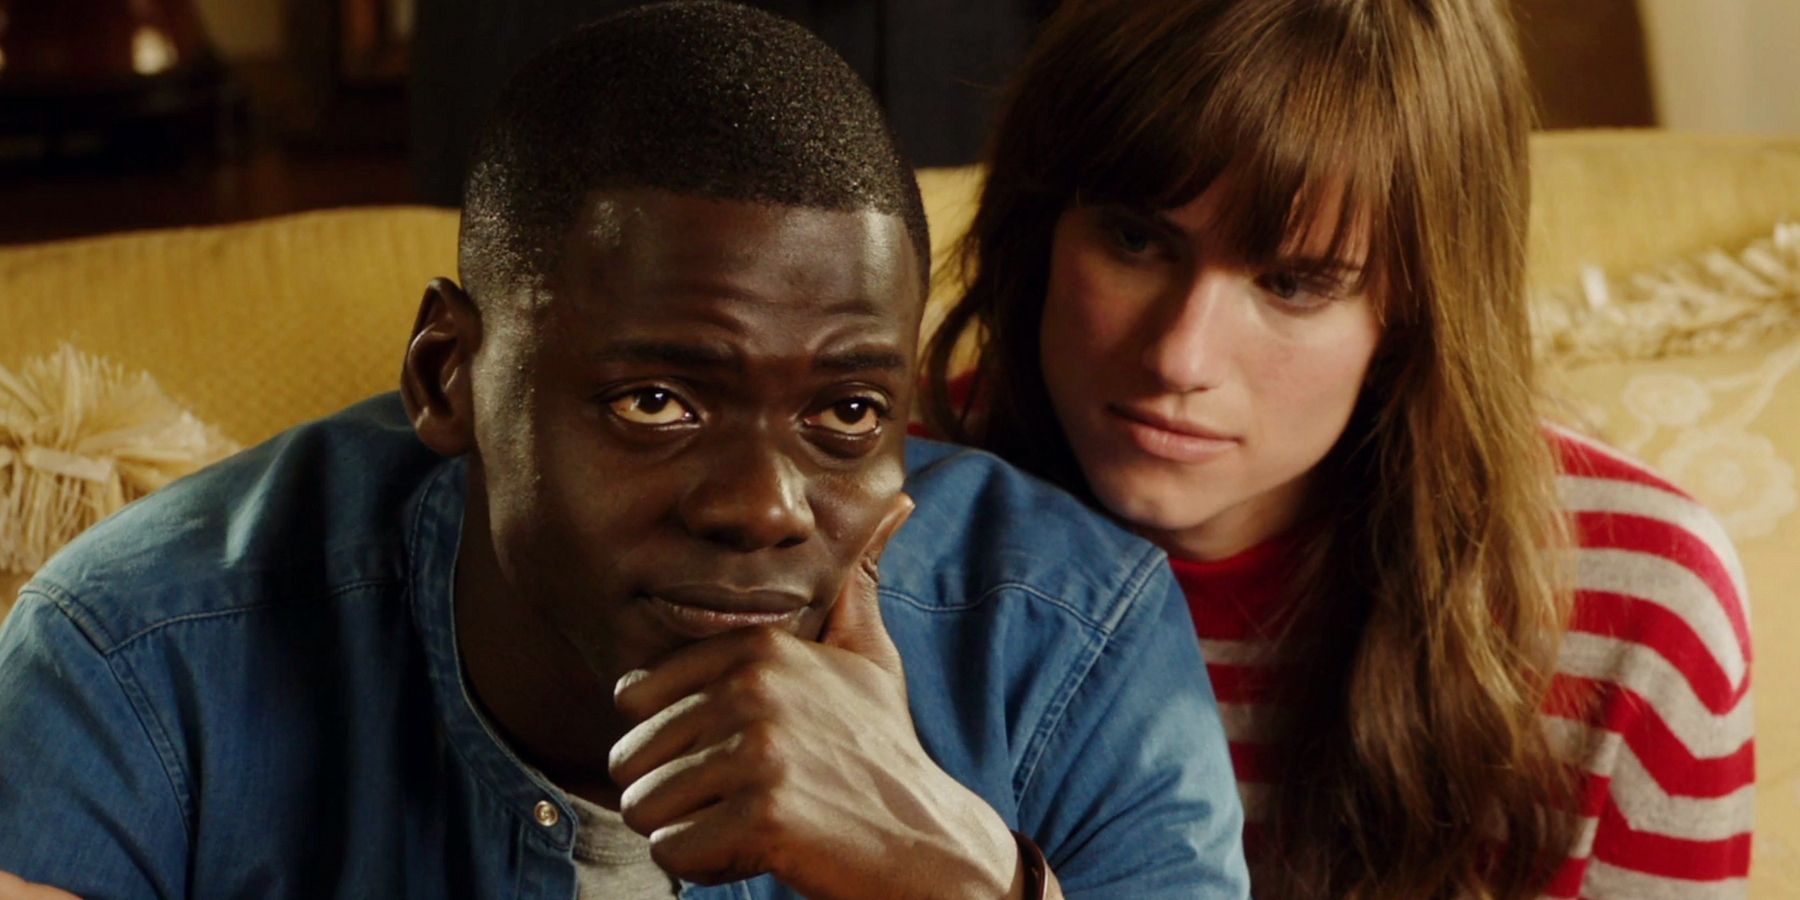 Get Out image with Daniel Kaluuya and Lake Bell sitting on a sofa.